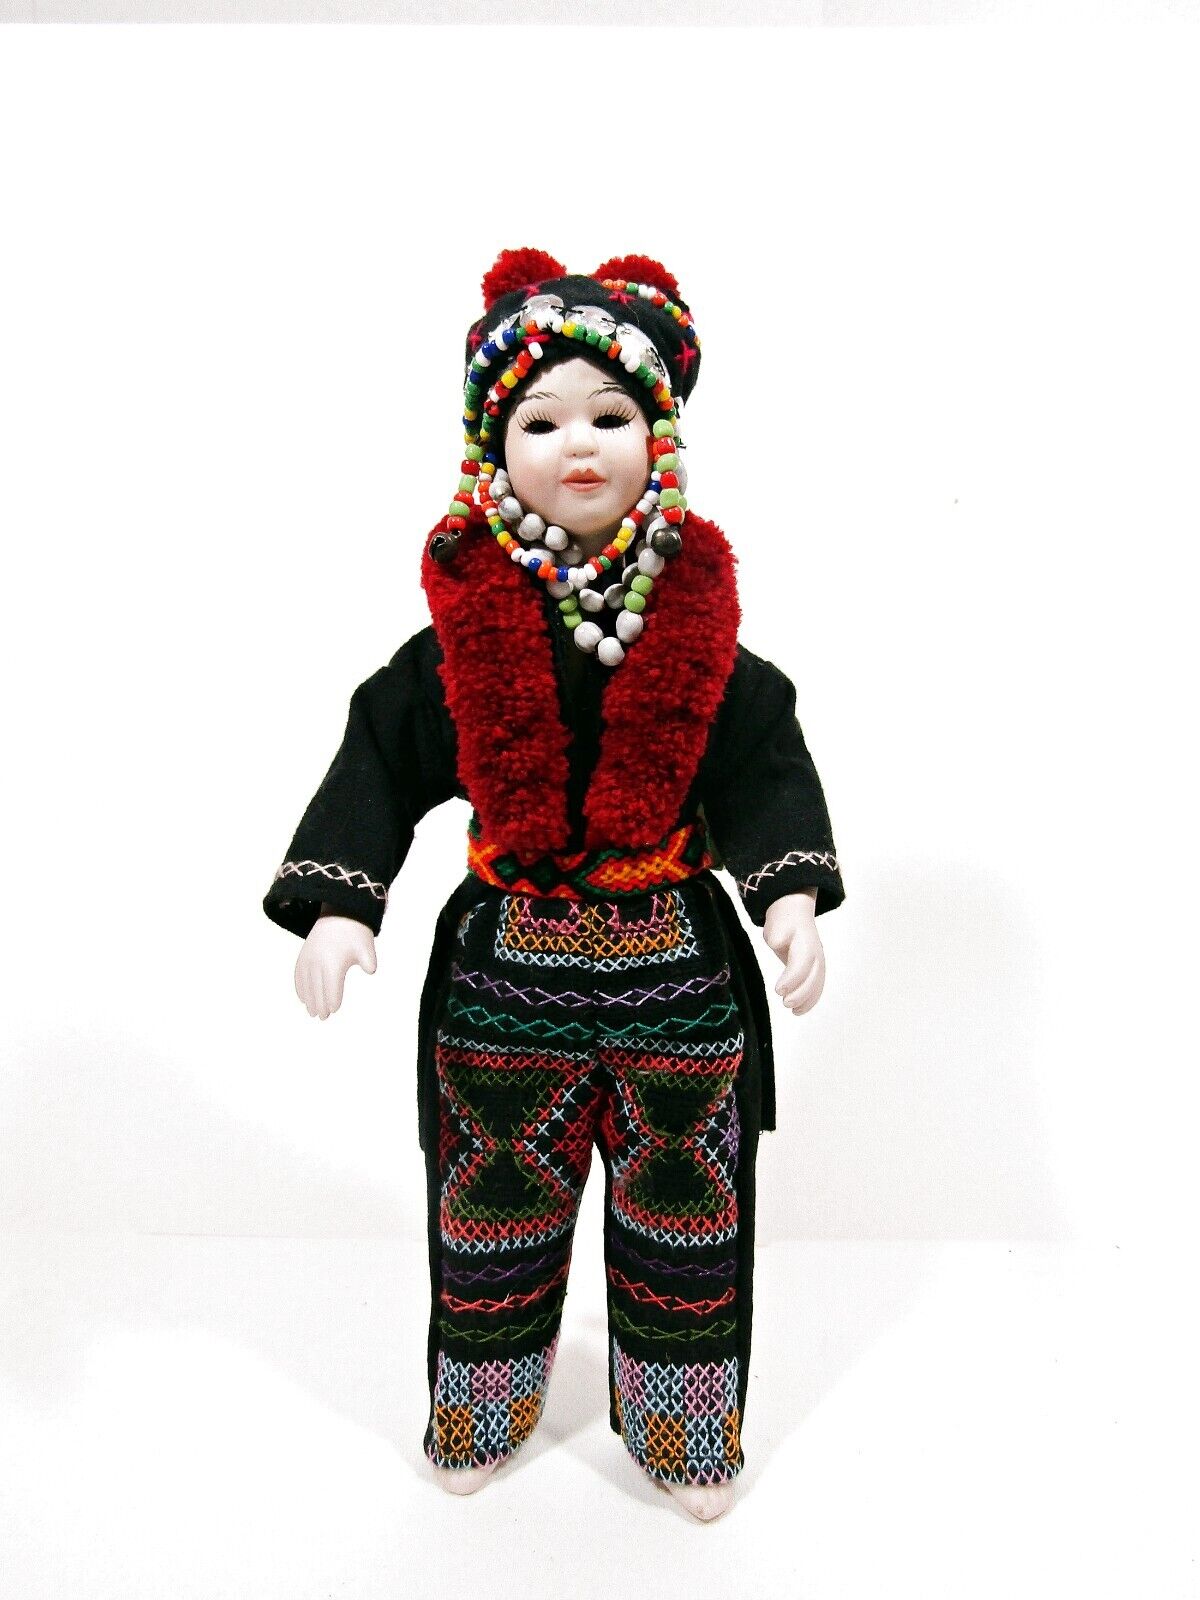 YAO Hilltribe Doll by Chiang Mai Porcelain Handmade Costume with Porcelain Face